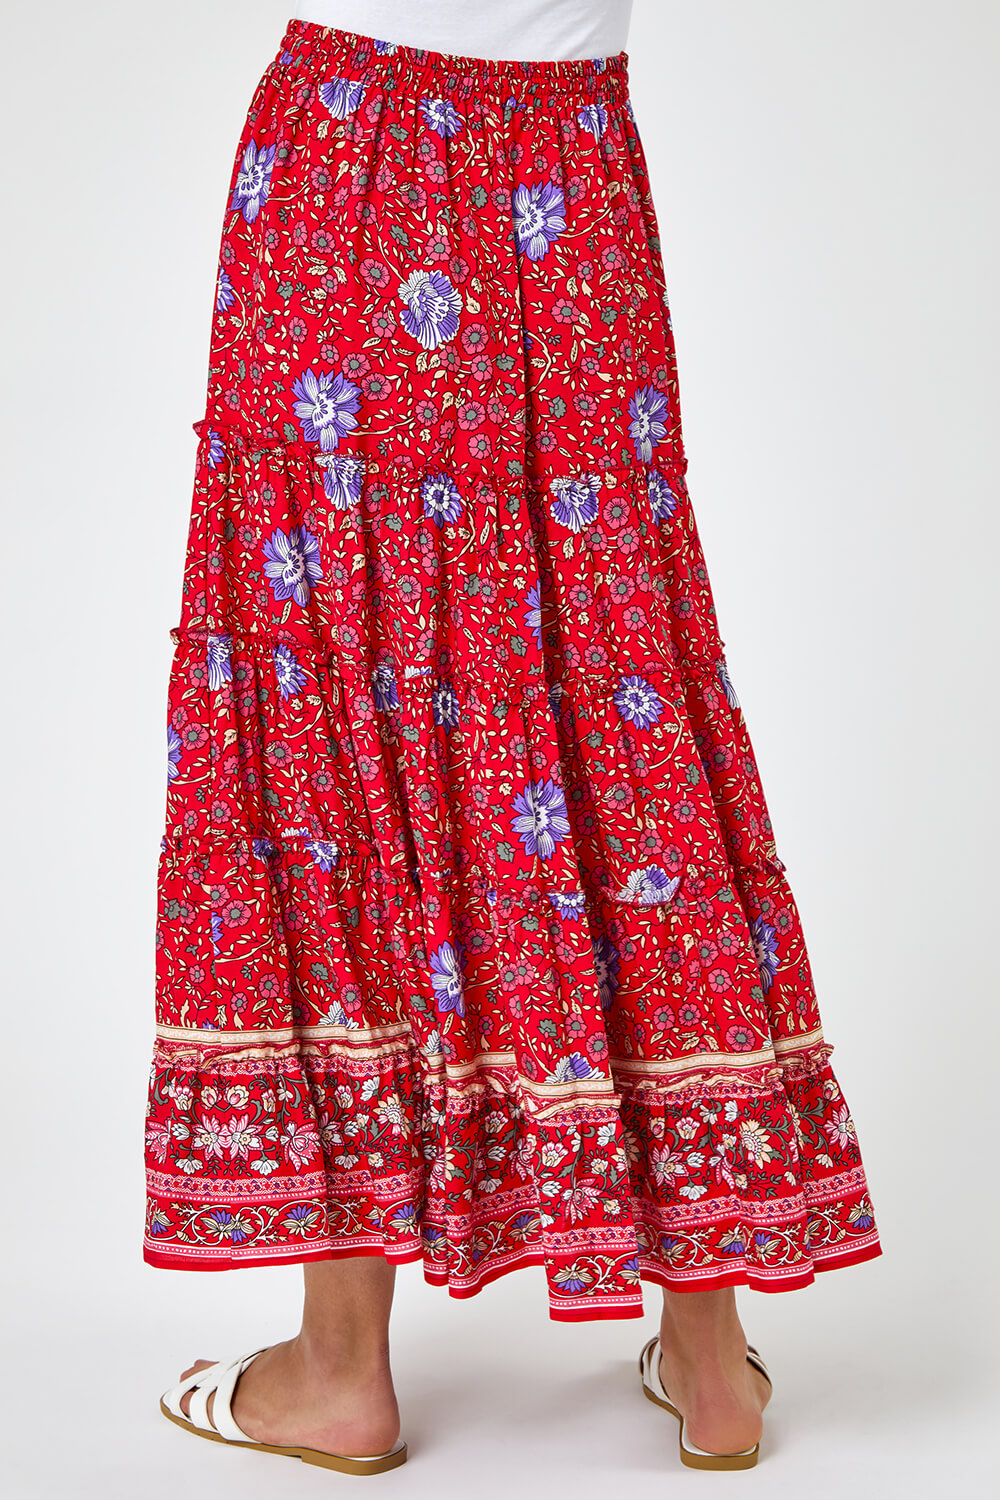 Red Boho Floral Print Tiered Maxi Skirt, Image 2 of 5